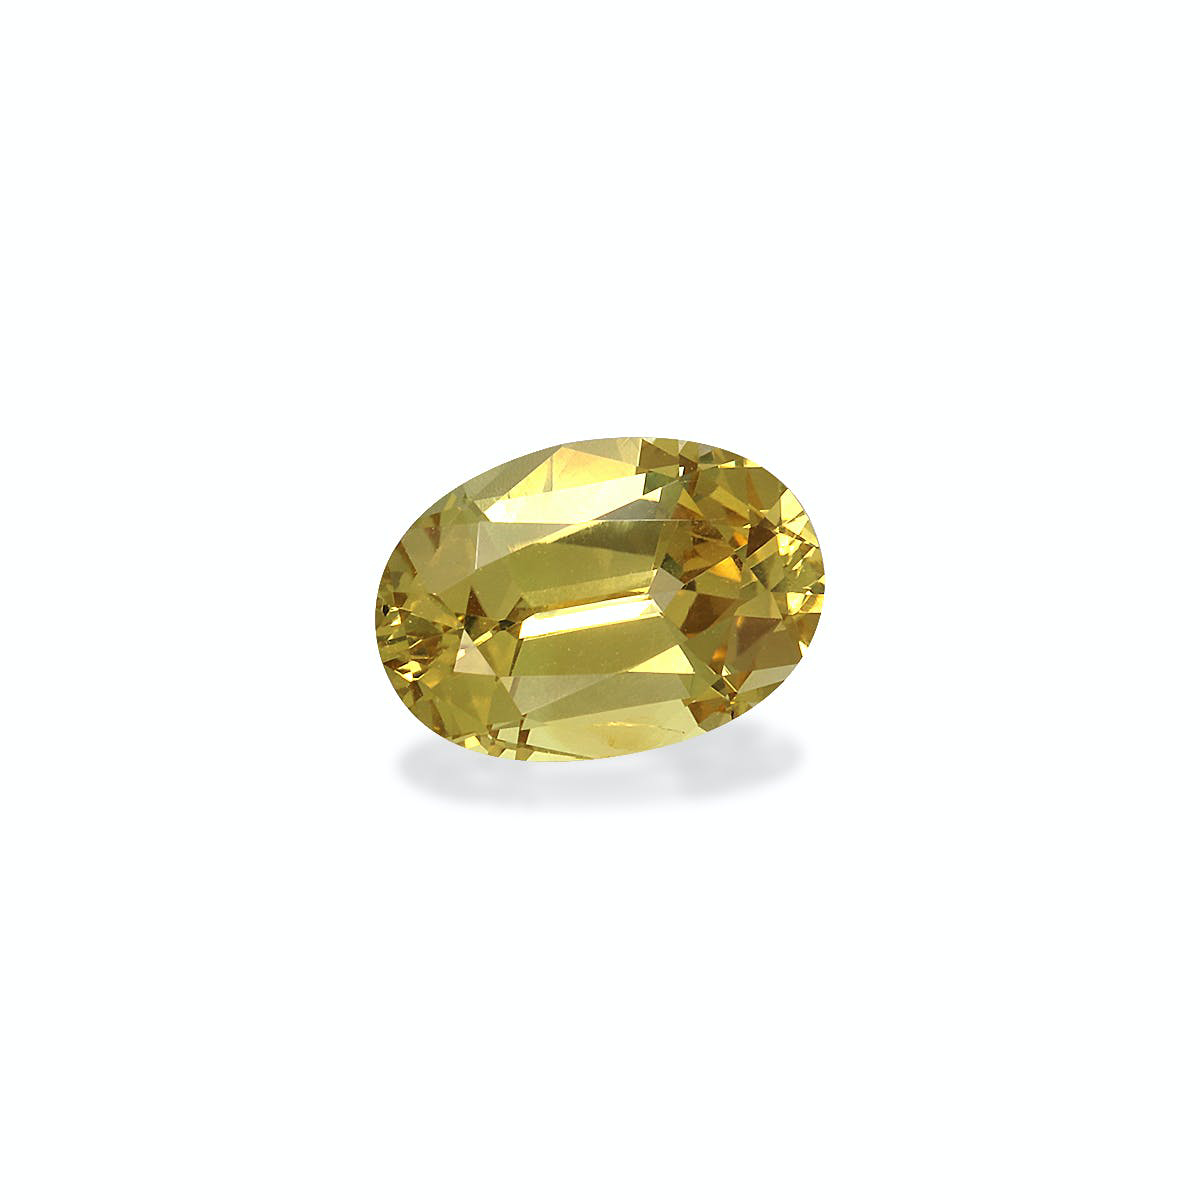 Picture of Golden Yellow Chrysoberyl 1.69ct - 8x6mm (CB0158)